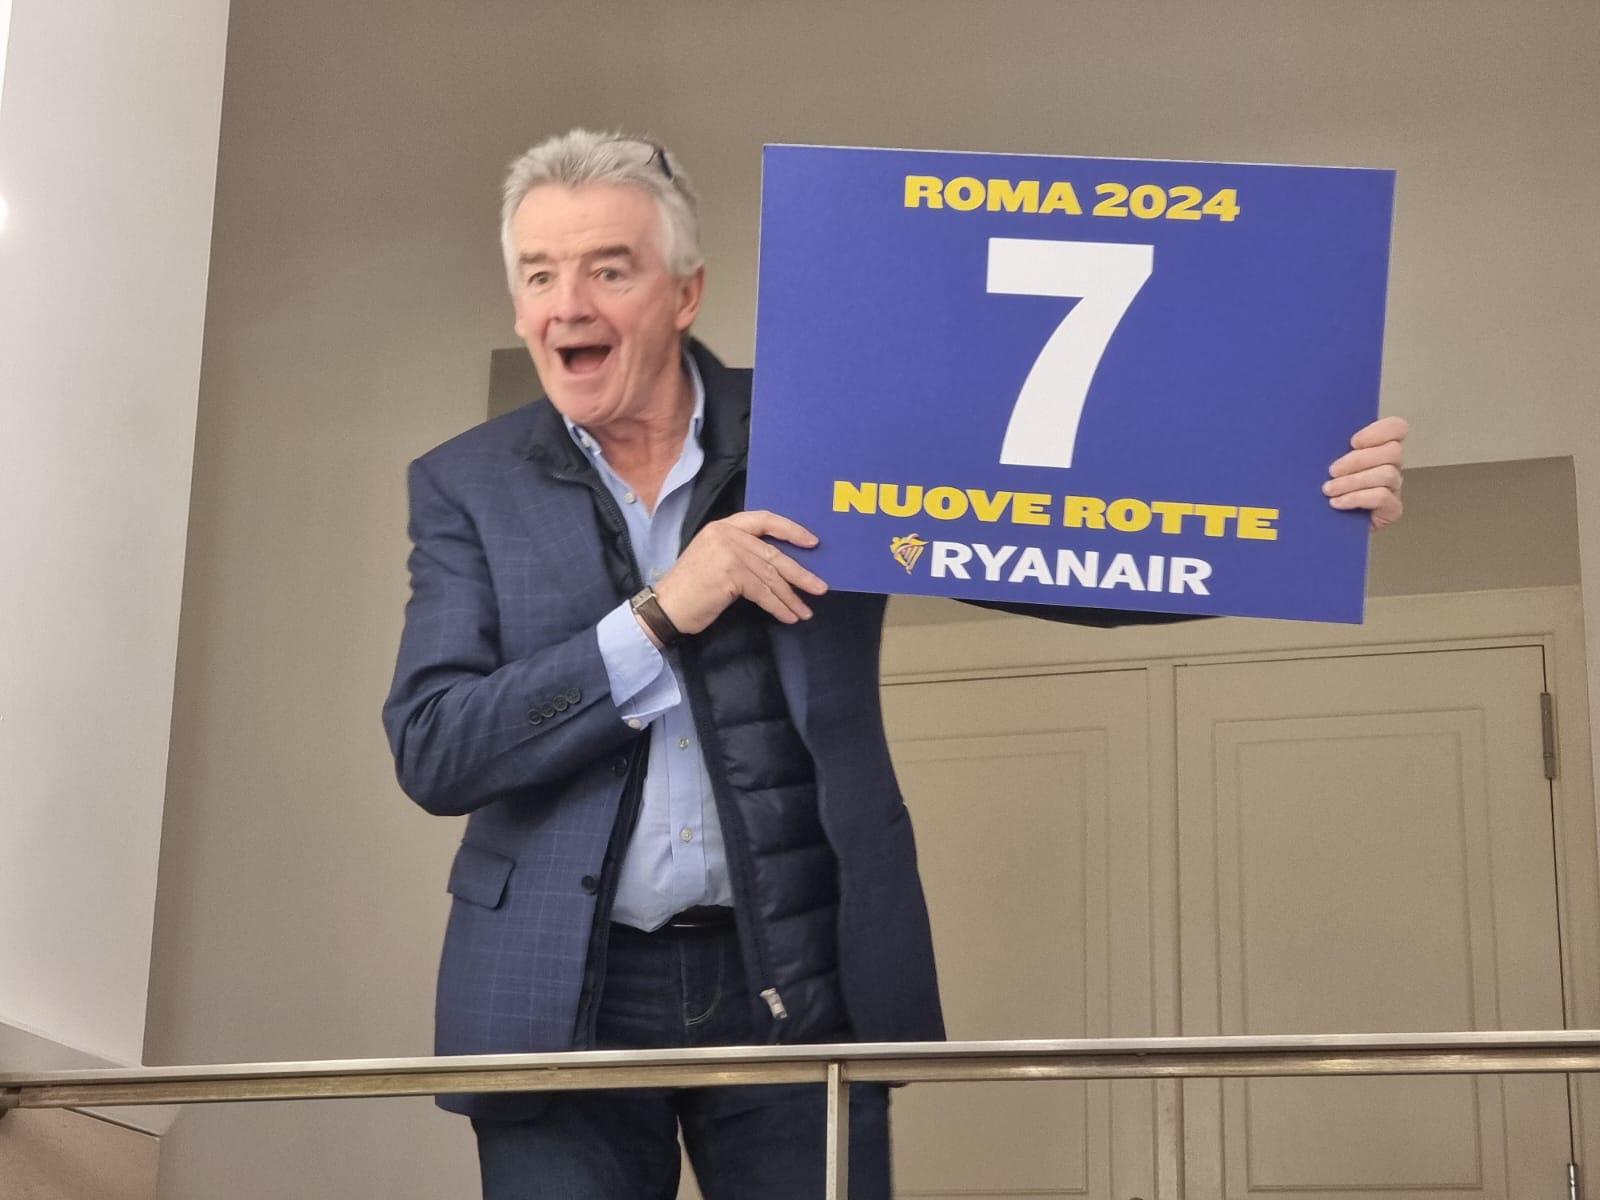 Cover image from Ryanair